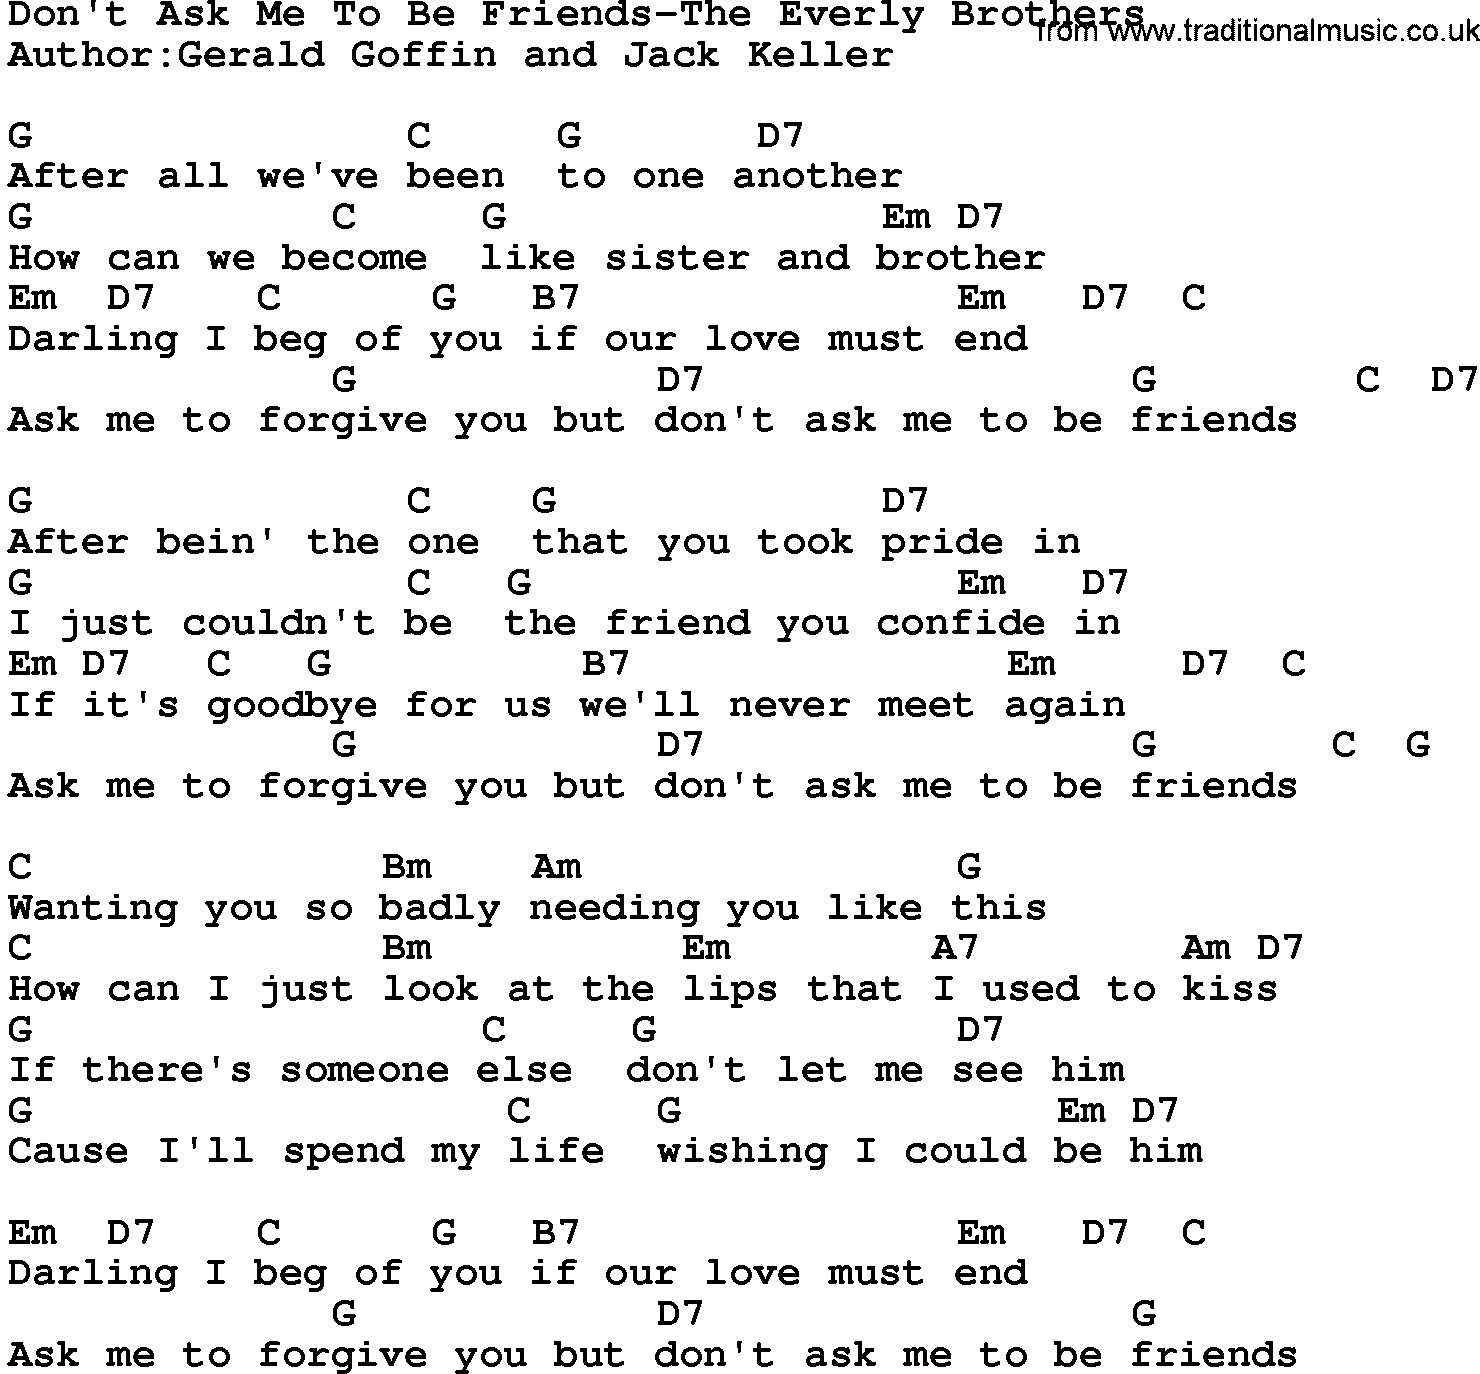 Country music song: Don't Ask Me To Be Friends-The Everly Brothers lyrics and chords